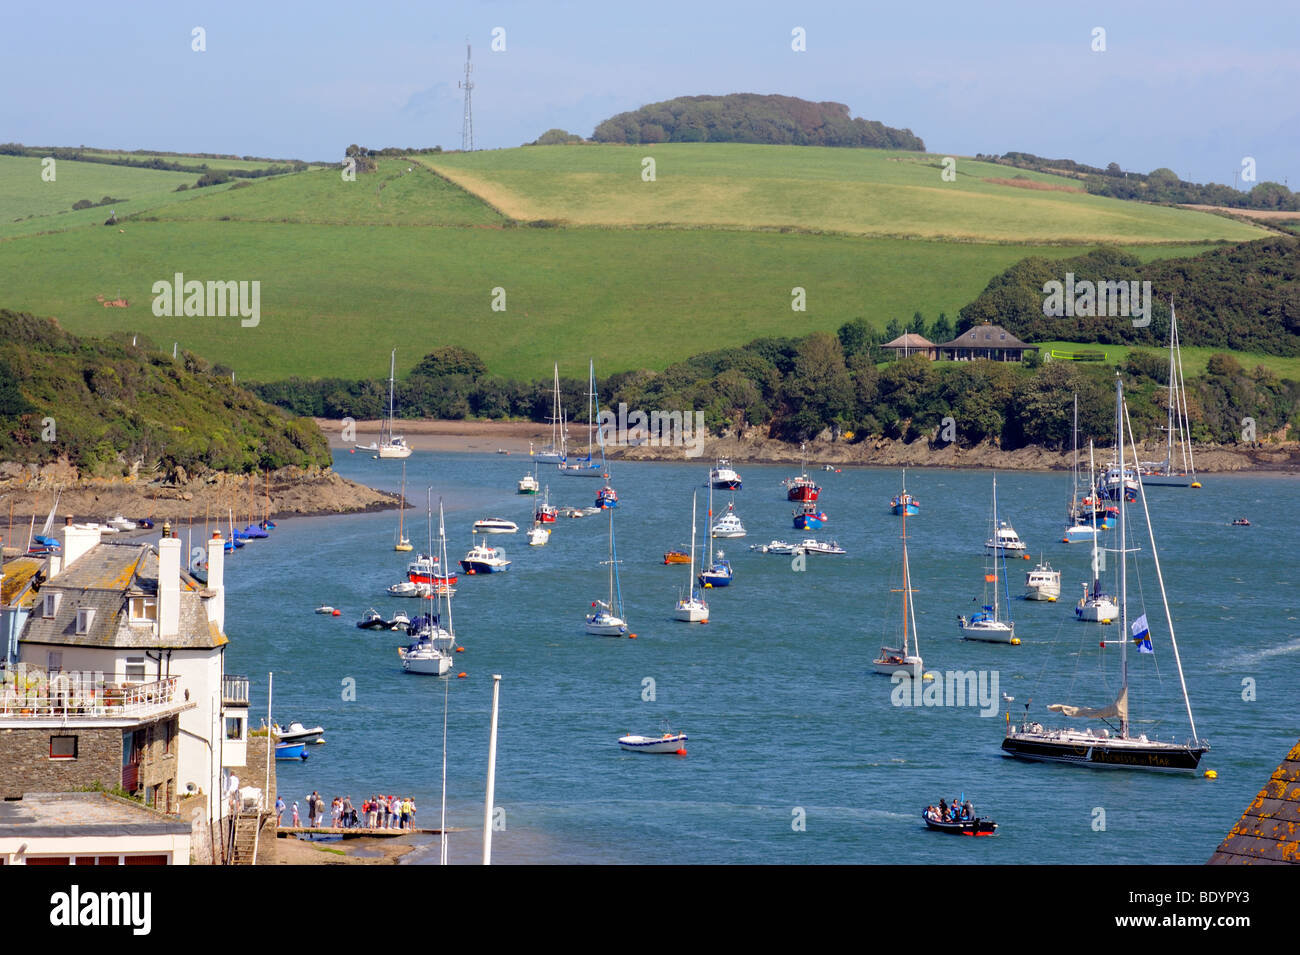 Yachts moored on the estuary in Salcombe, Devon, England Stock Photo